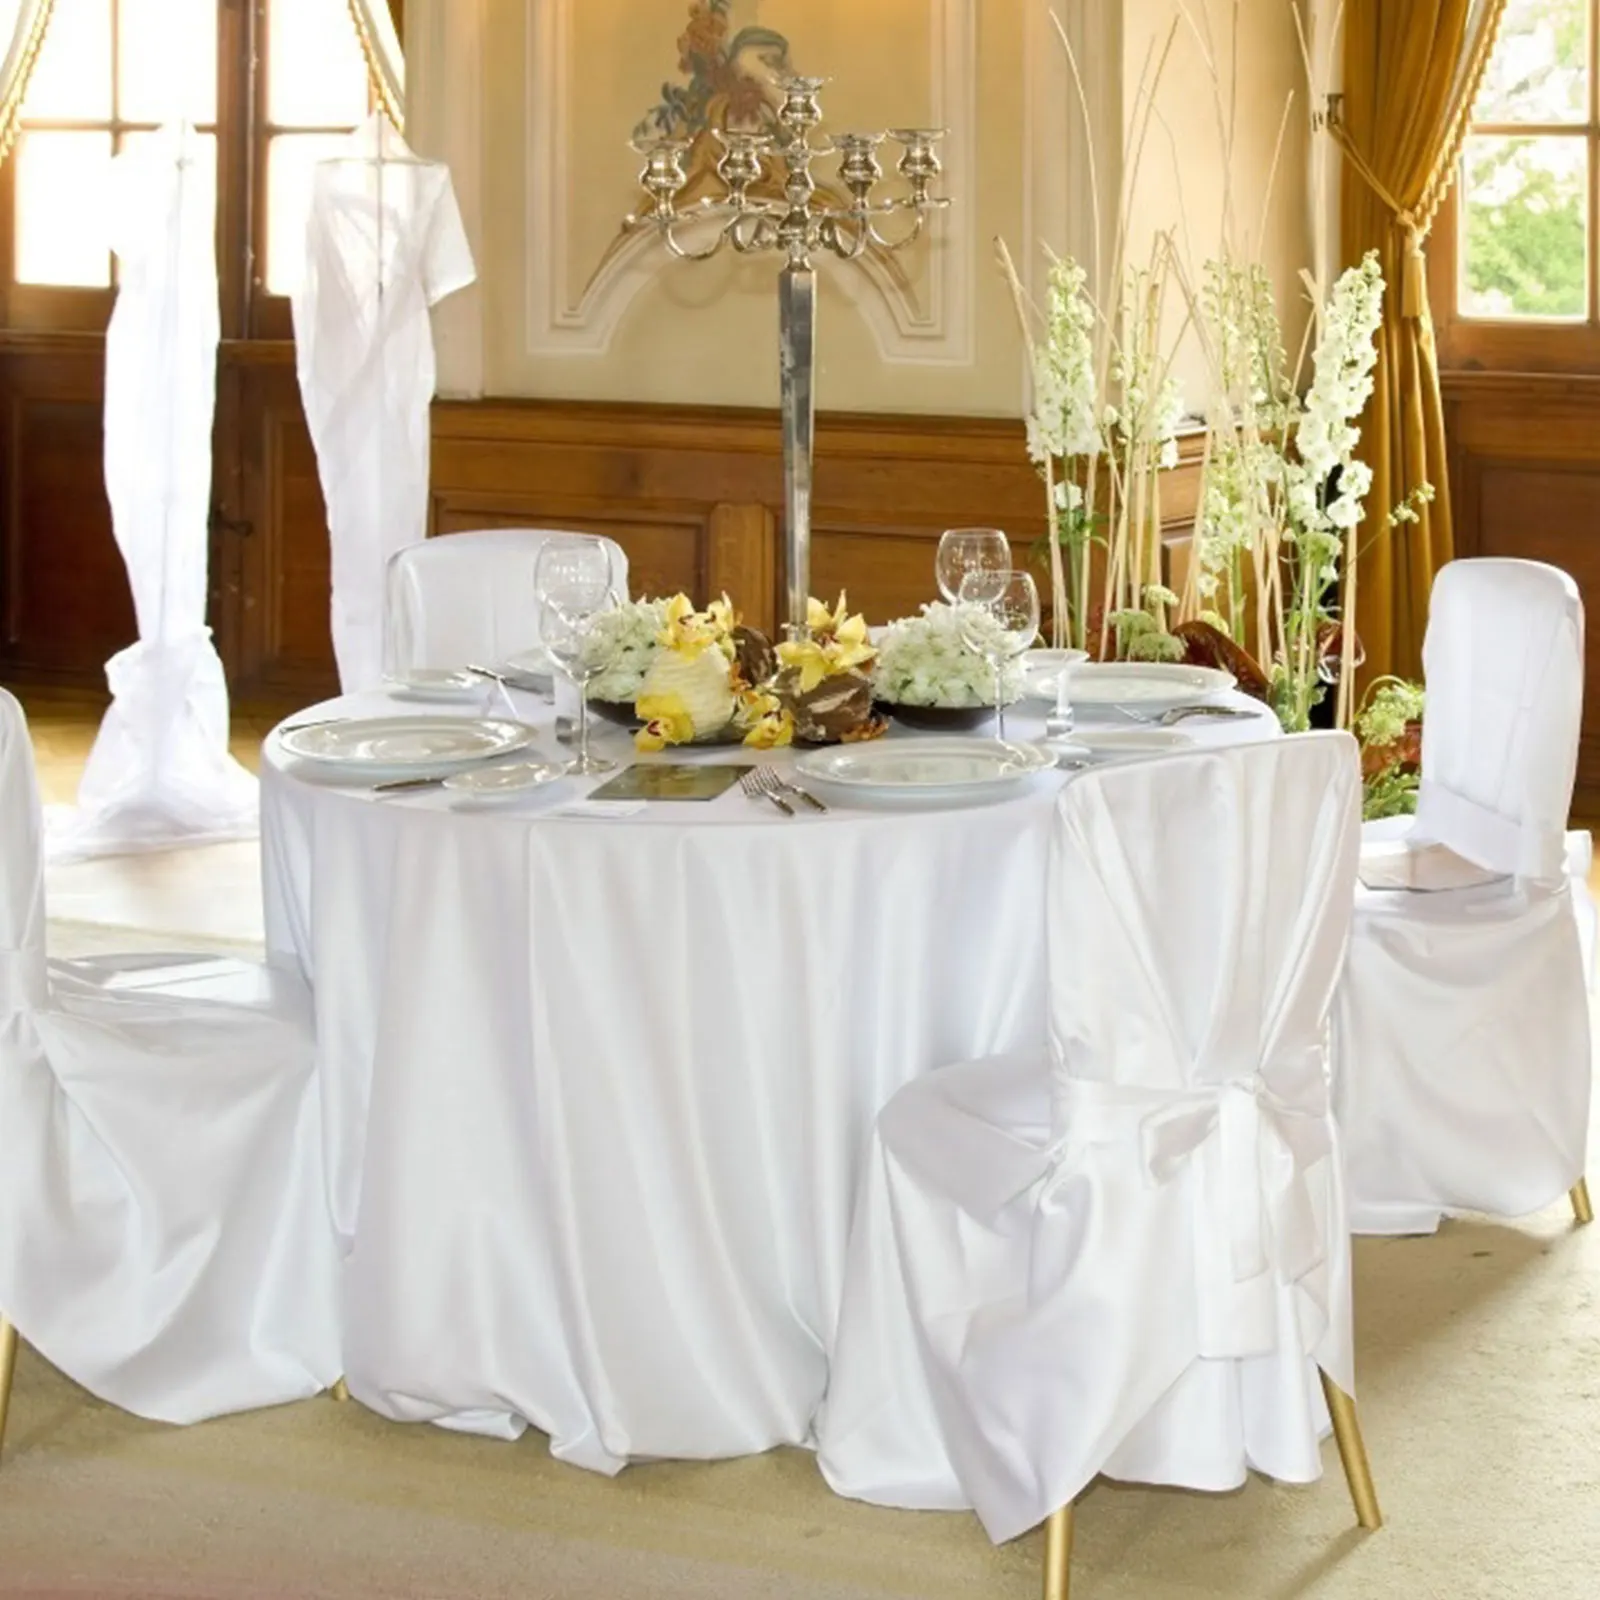 145cm Round Satin Tablecloths Fabric Wedding Table Cover Banquet Home Dinner Dec 